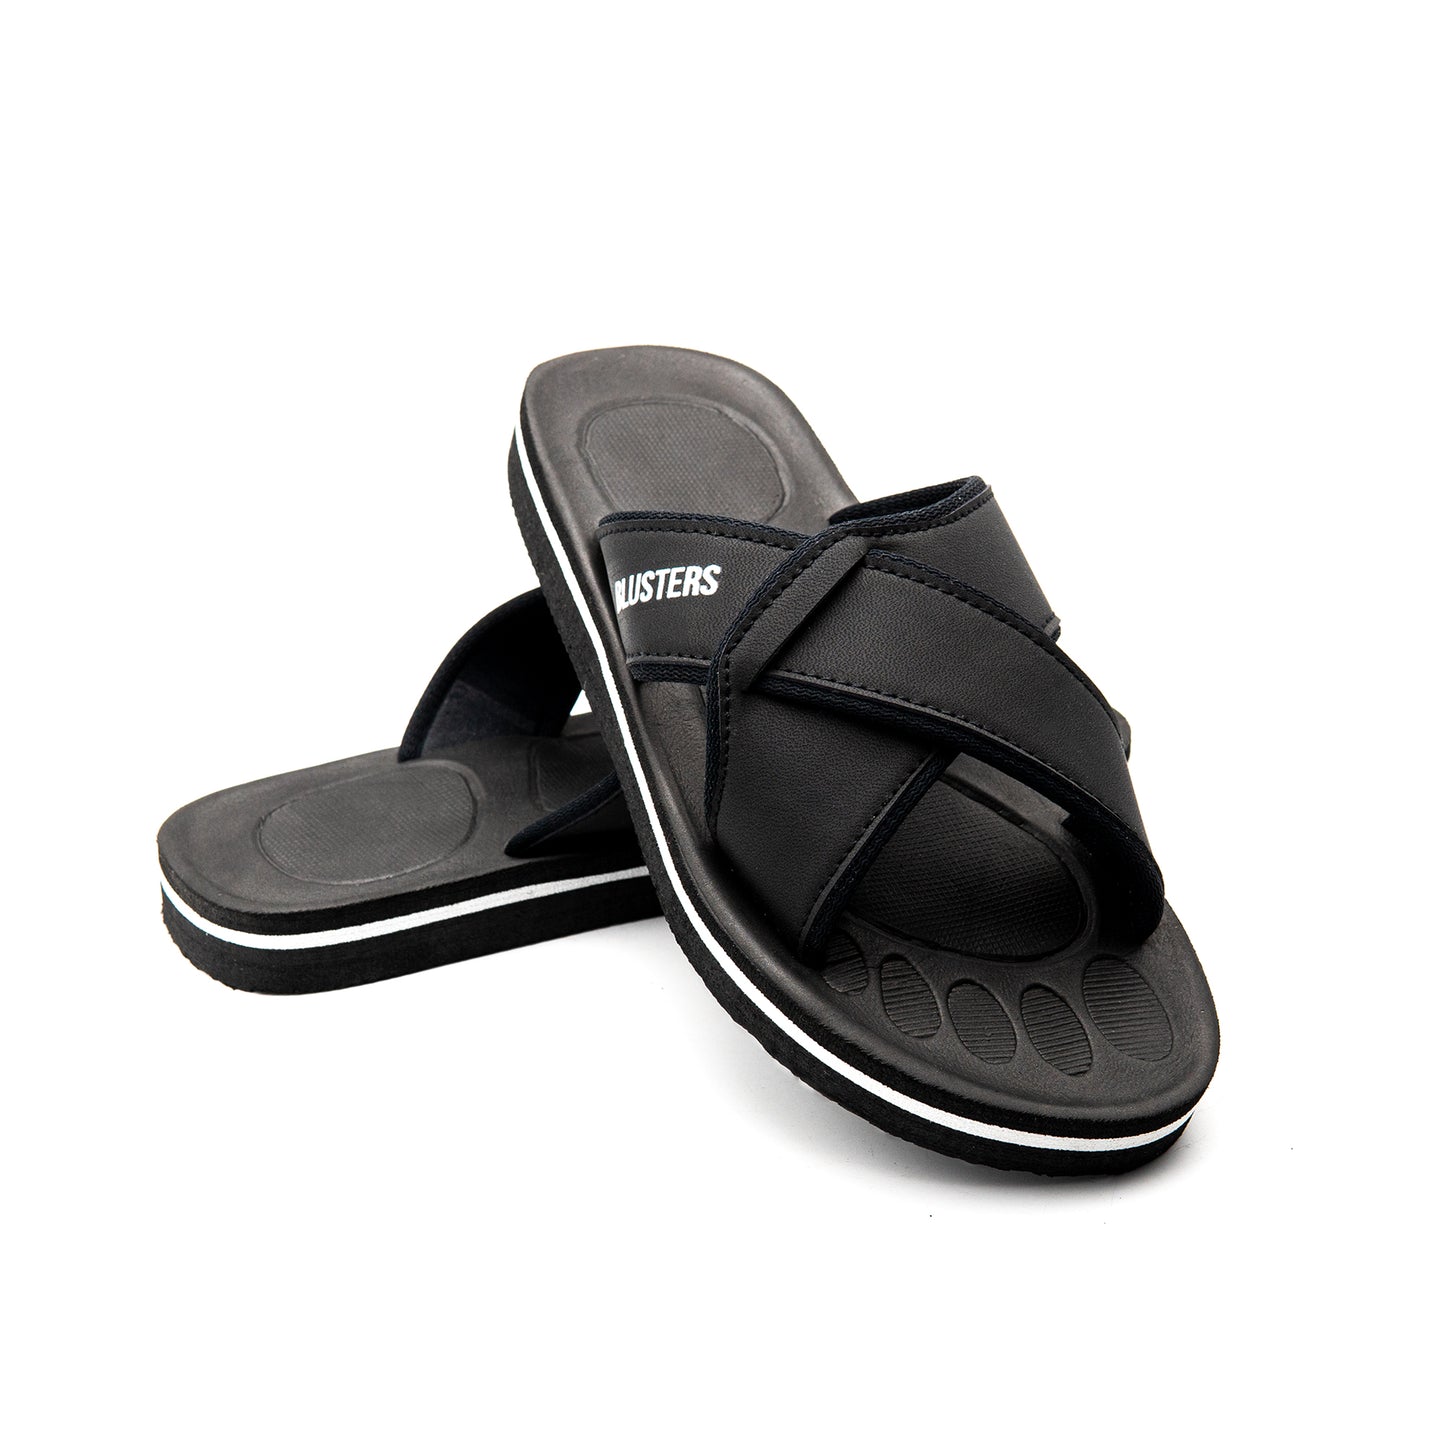 Black Double Styled Comfy Slippers